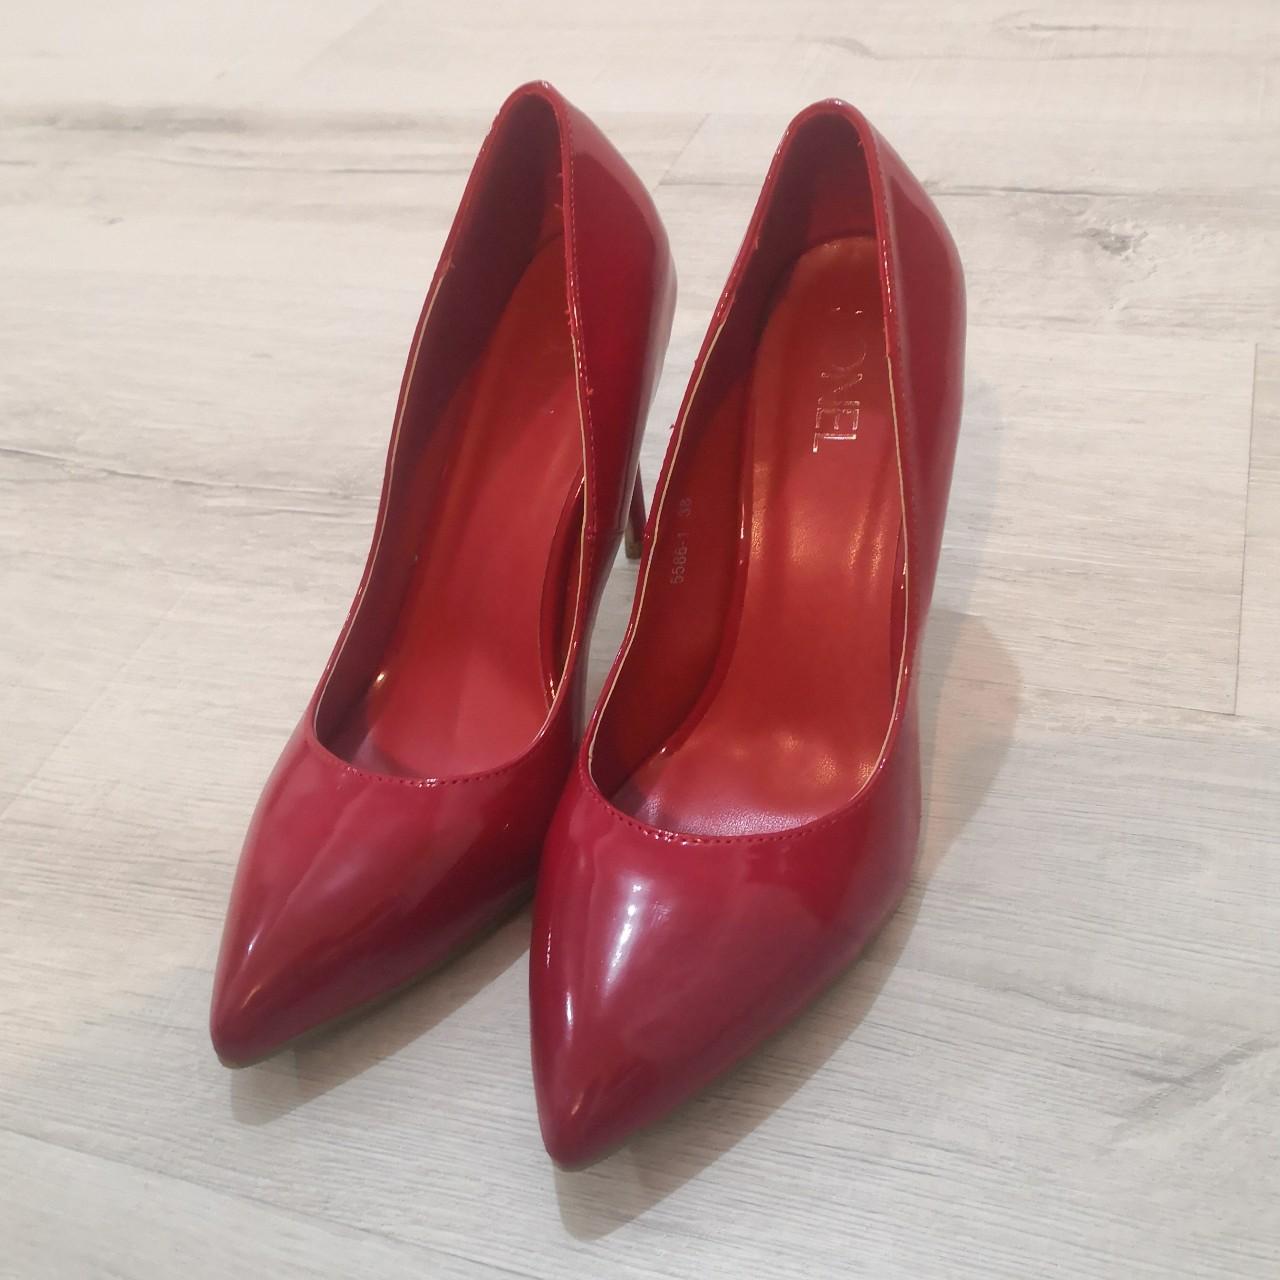 High heels Colour: red Size: 38 9/10 condition - Depop